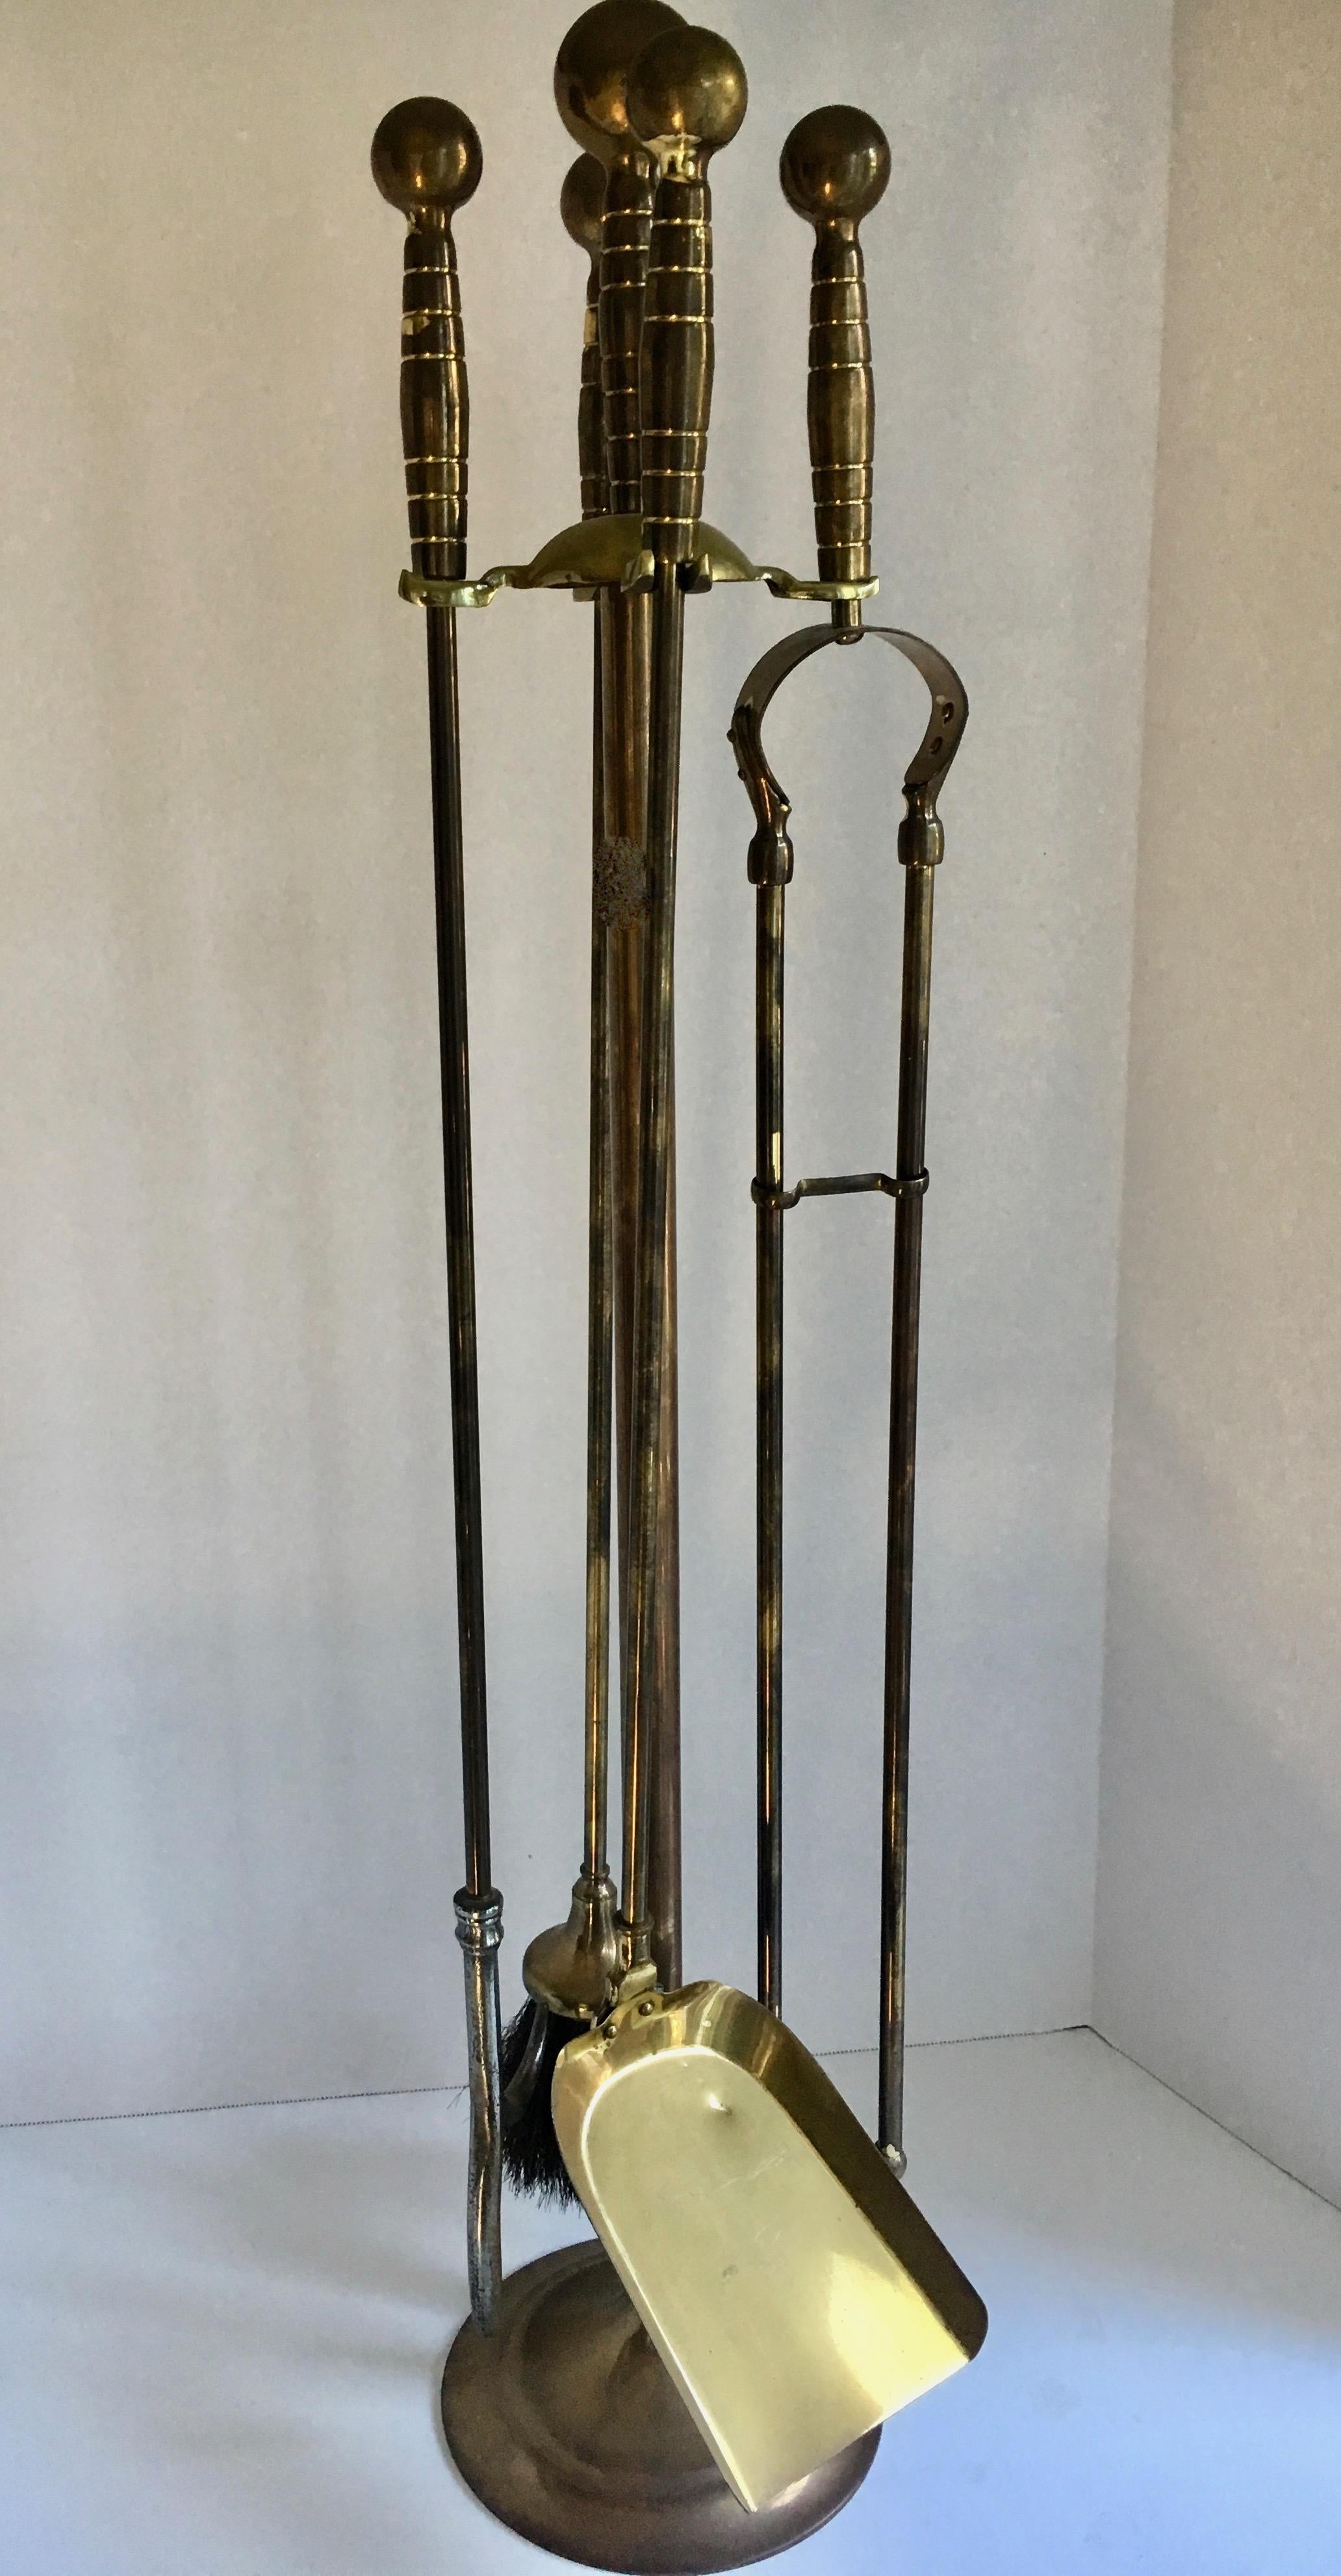 Set of brass fireplace tools on stand - broom, tongs, shovel and poker on a stand. Perfect for any fireplace setting, from cabin to traditional or modern home.